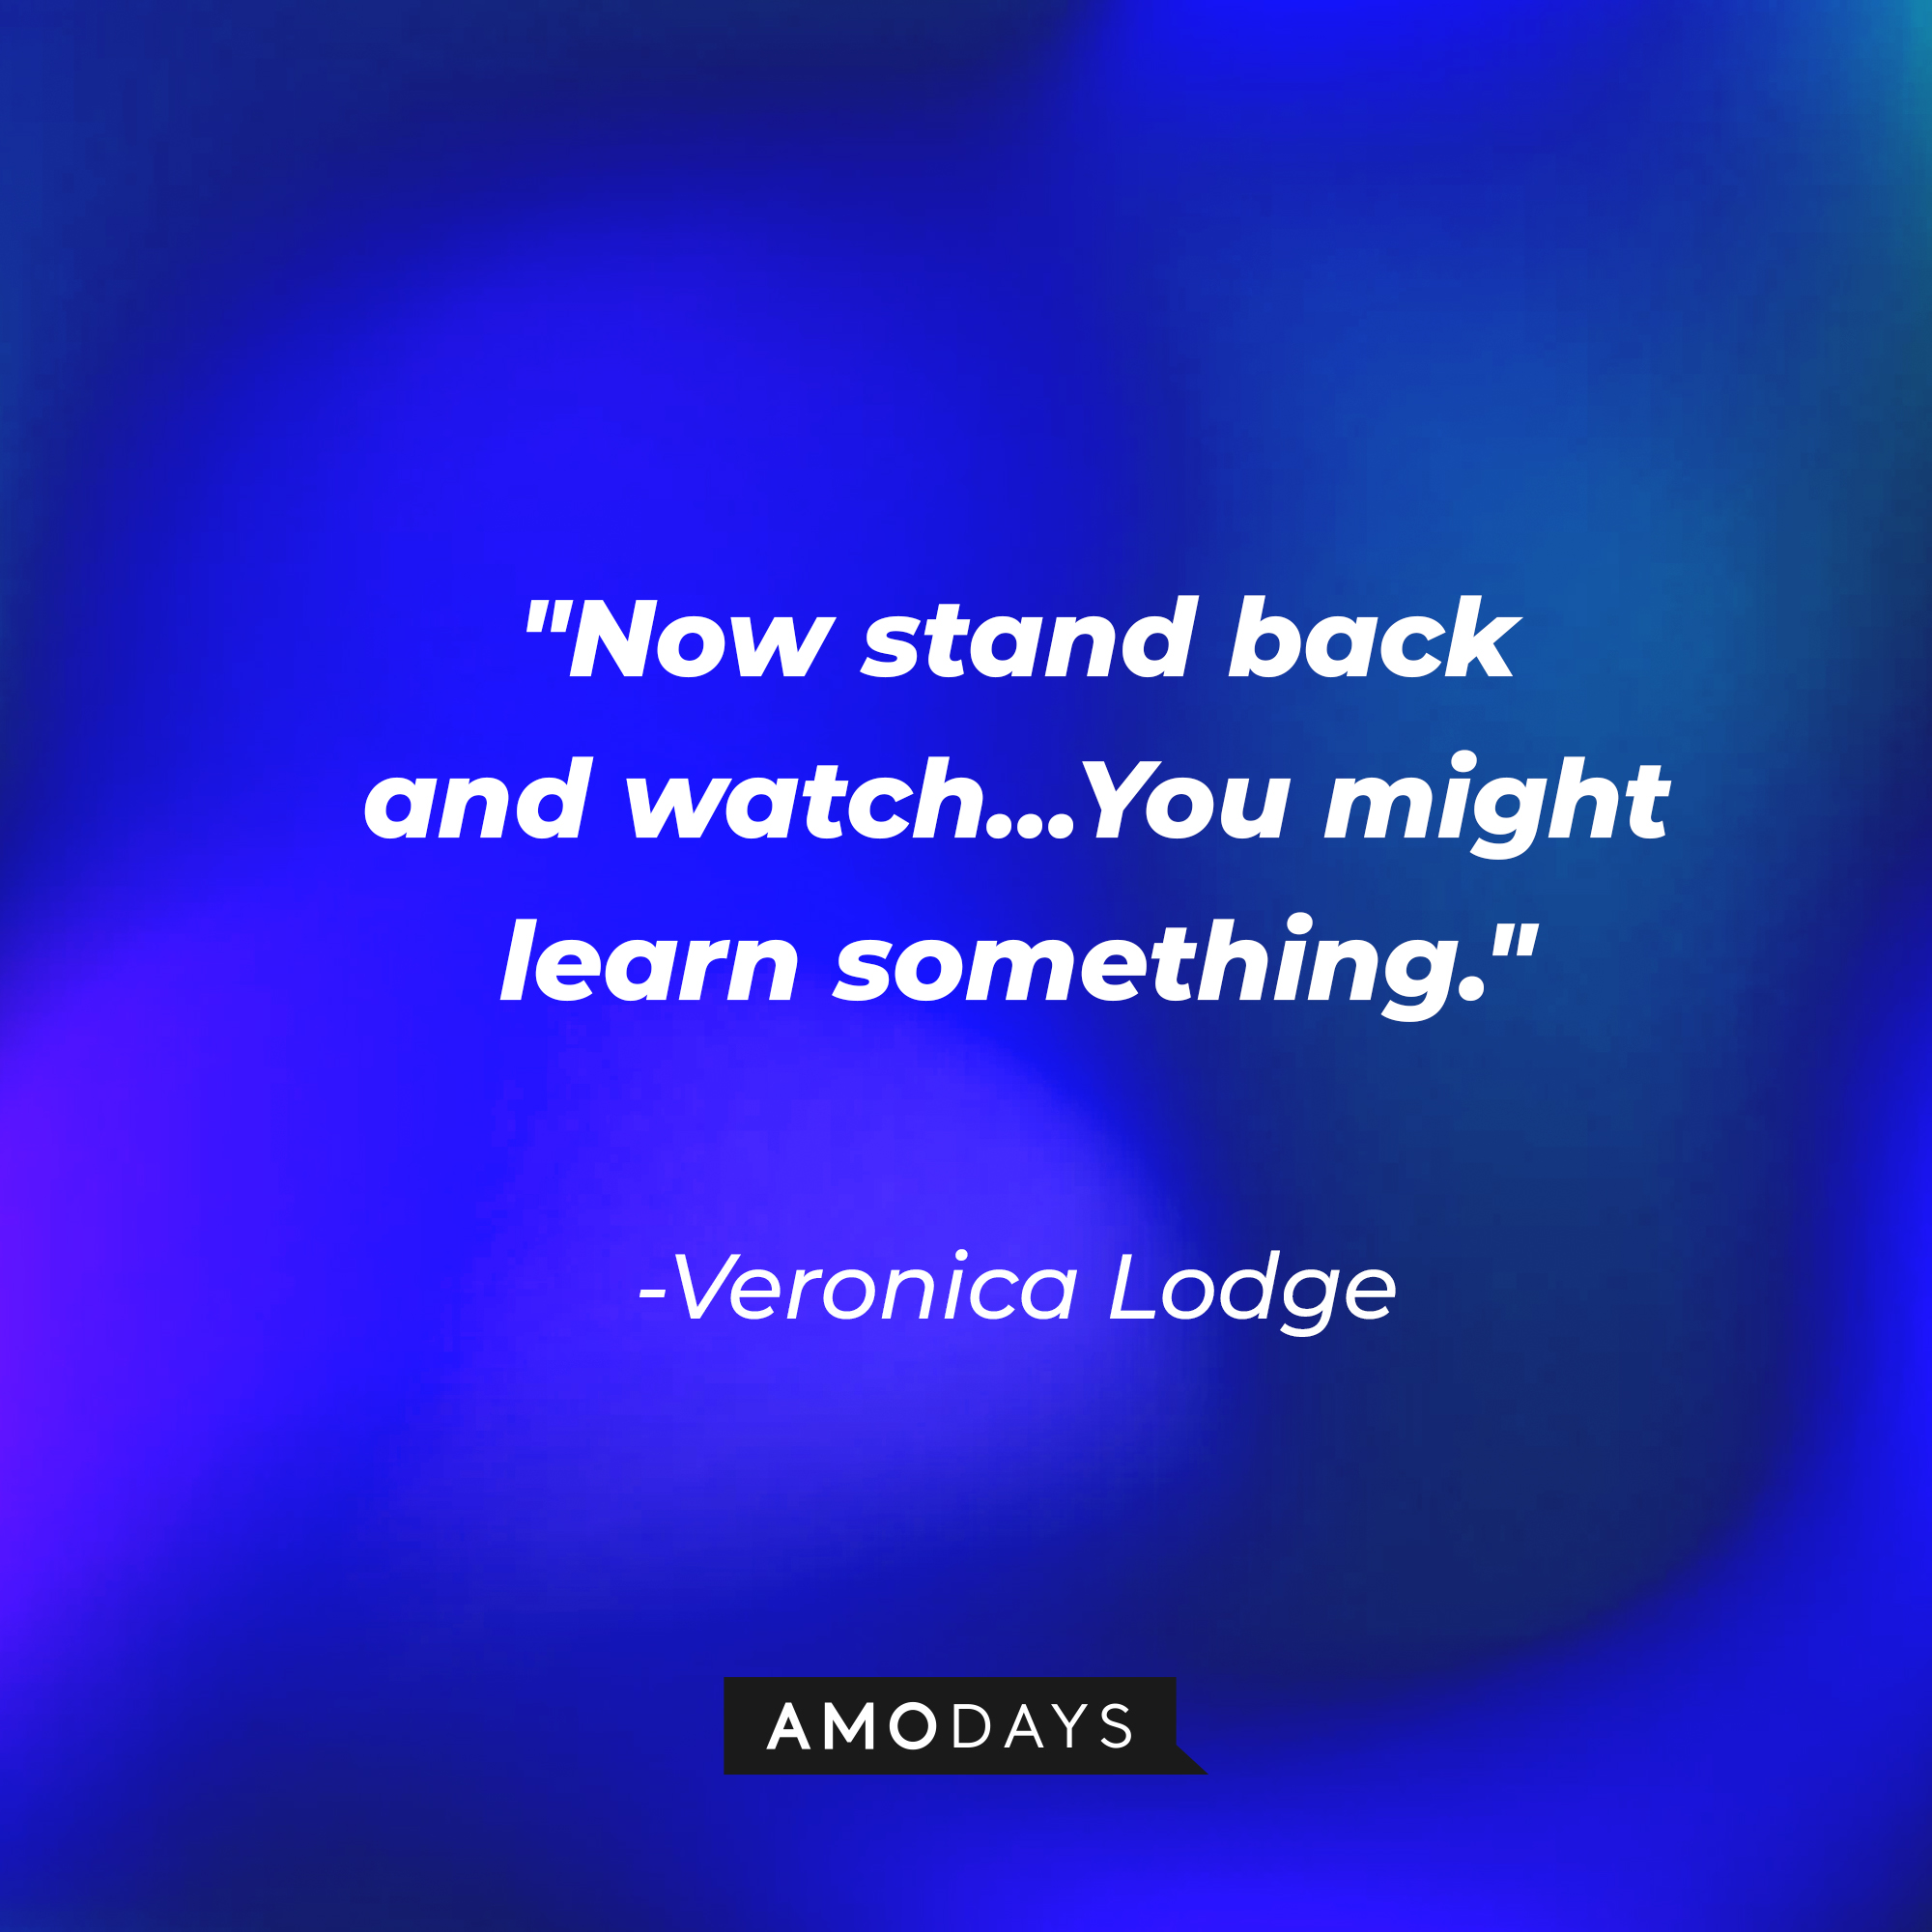 Veronica Lodge's quote: "Now stand back and watch...You might learn something." | Source: AmoDays